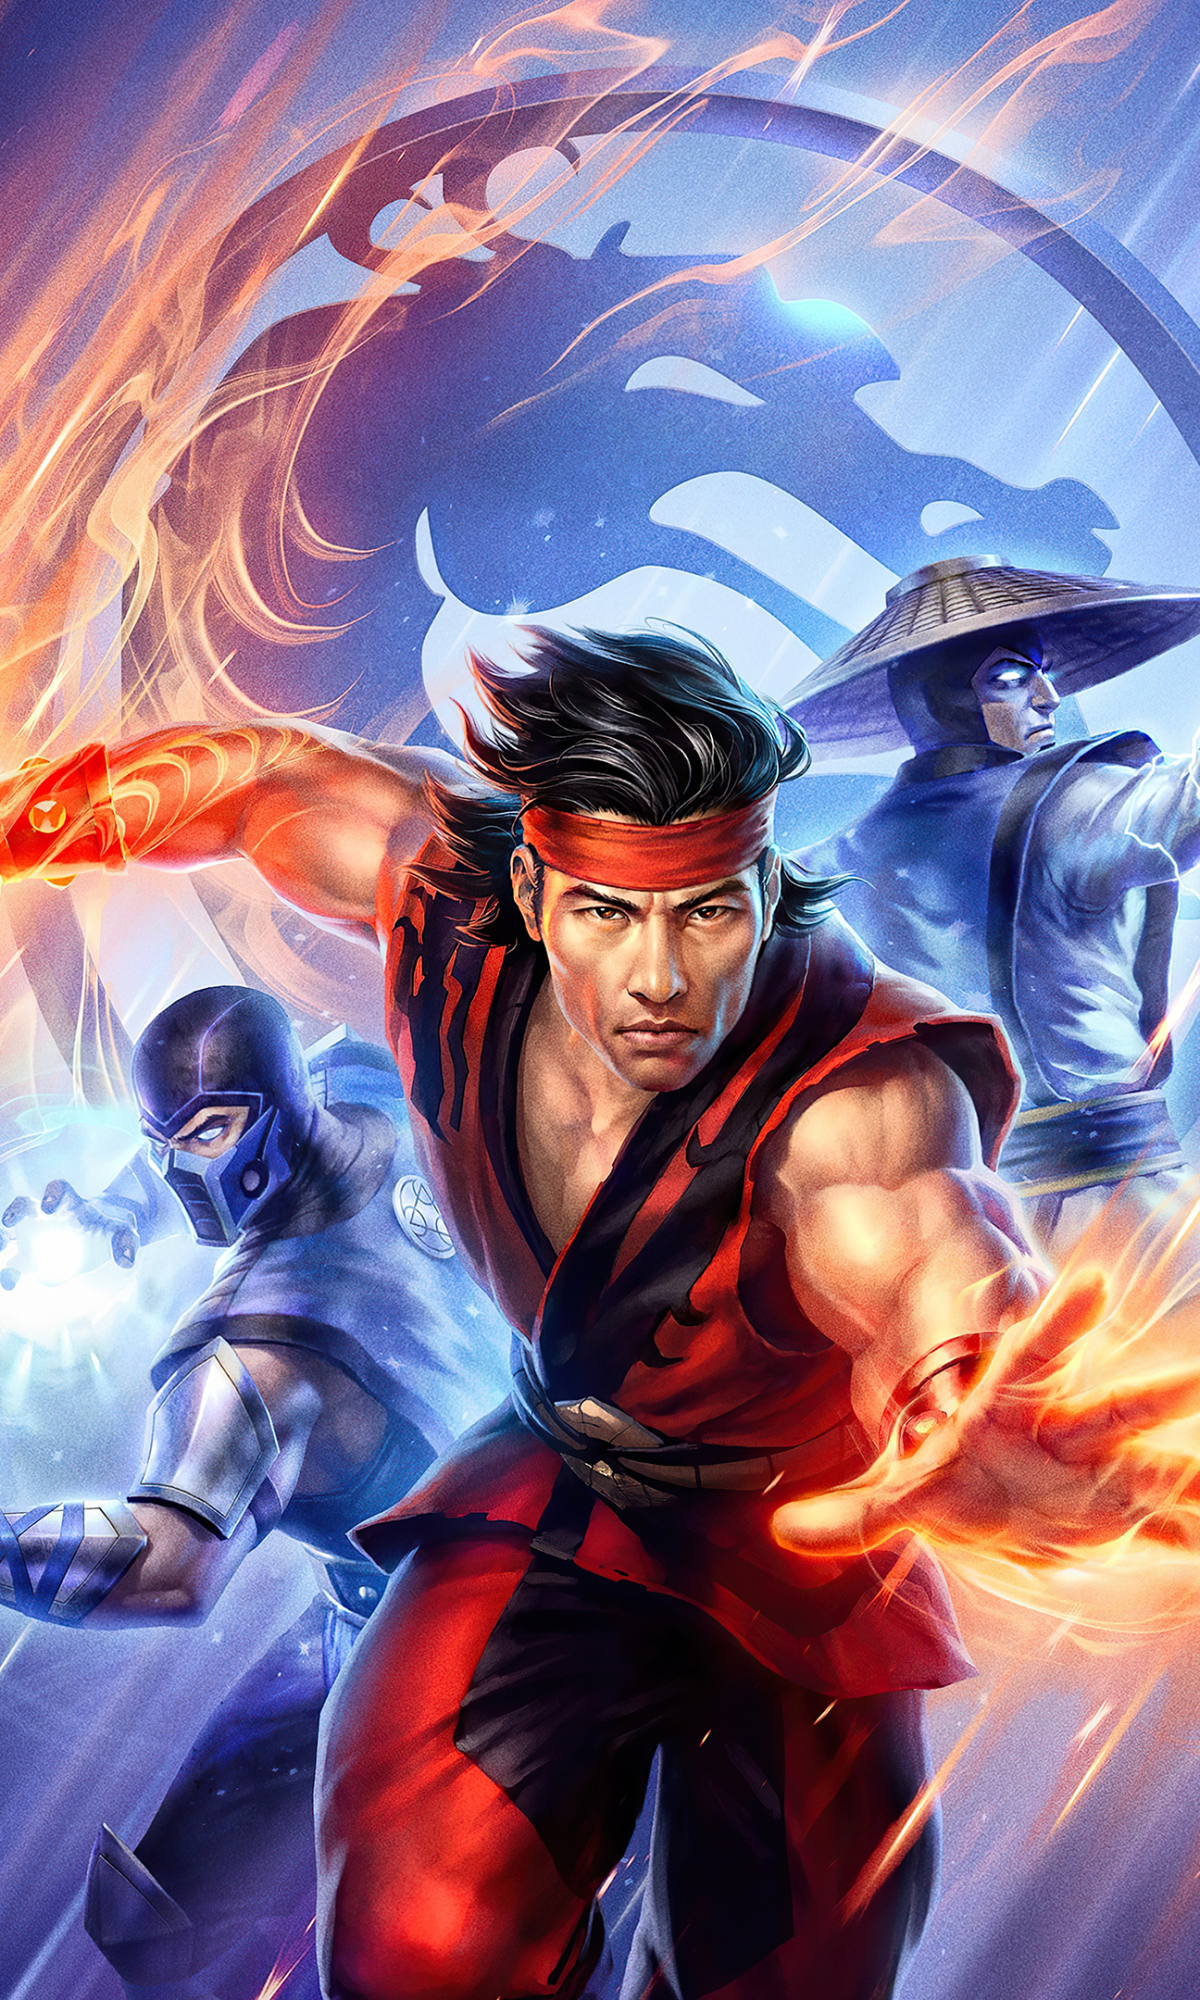 mortal kombat legends: battle of the realms, movie, sub zero (mortal kombat), raiden (mortal kombat), liu kang cell phone wallpapers